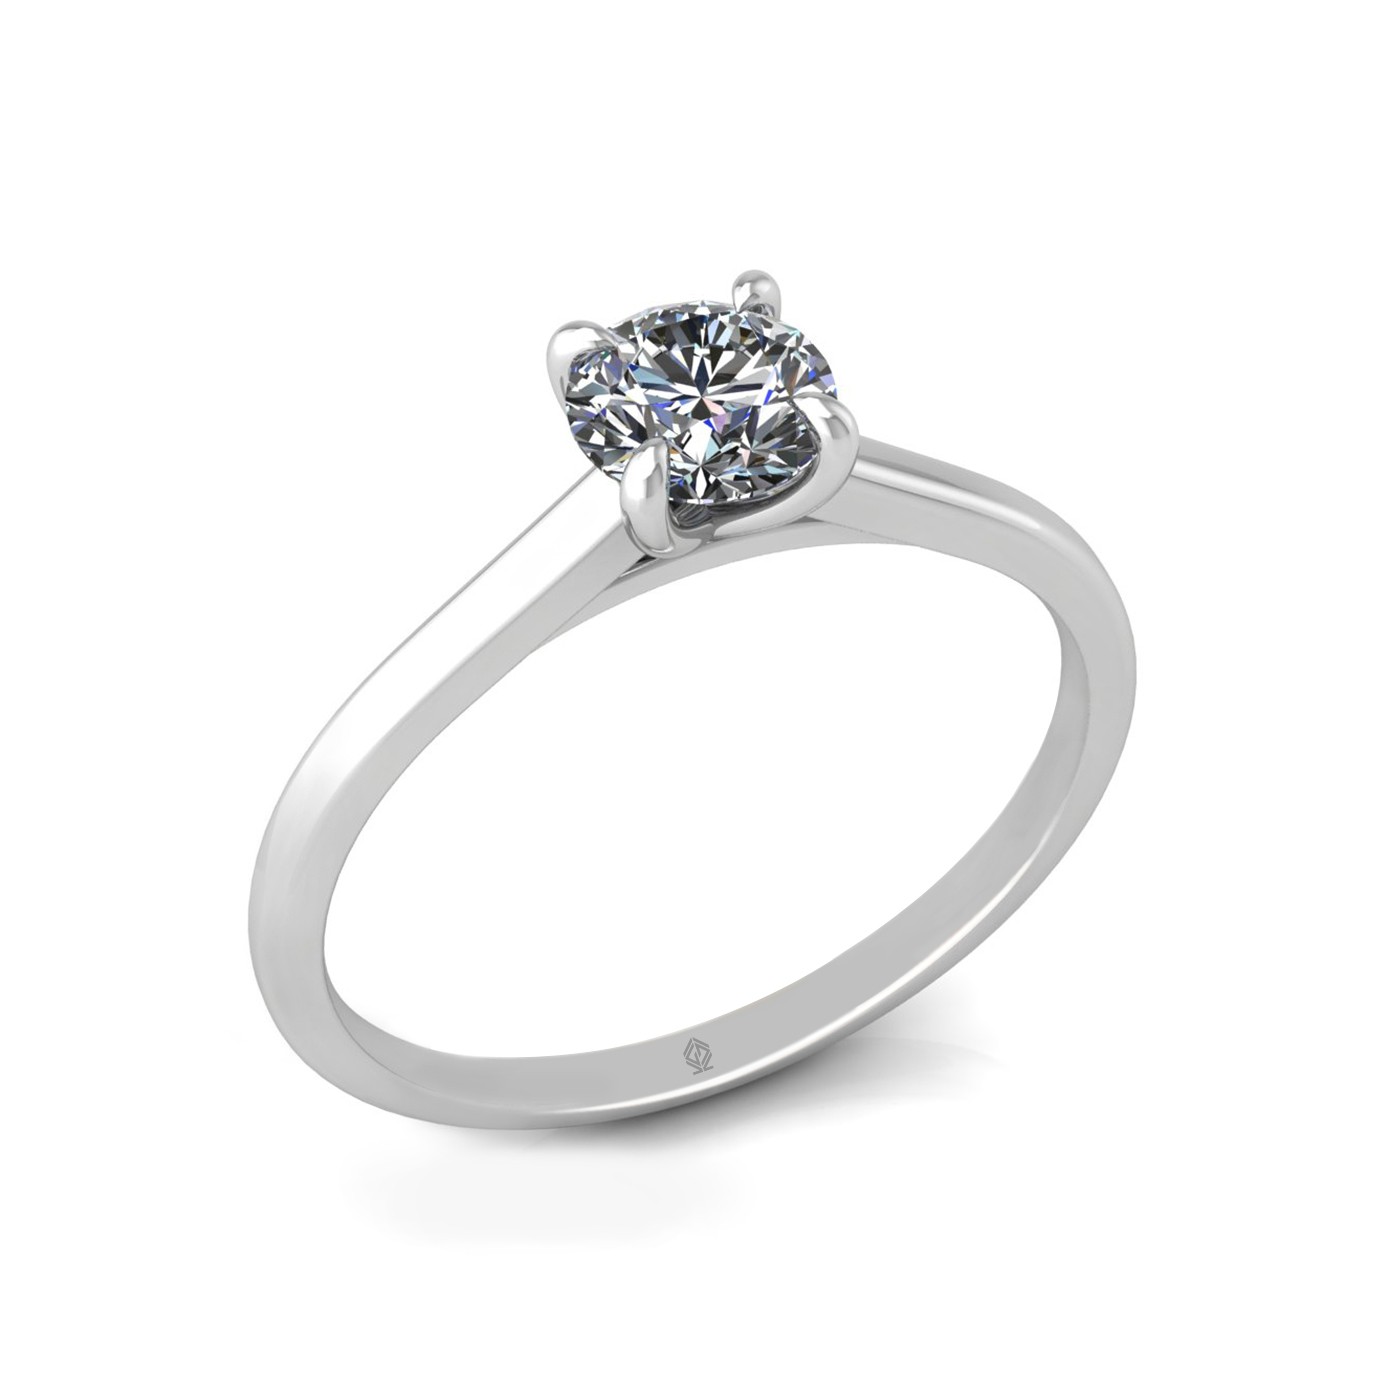 18k white gold 0,50 ct 4 prongs solitaire round cut diamond engagement ring with whisper thin band